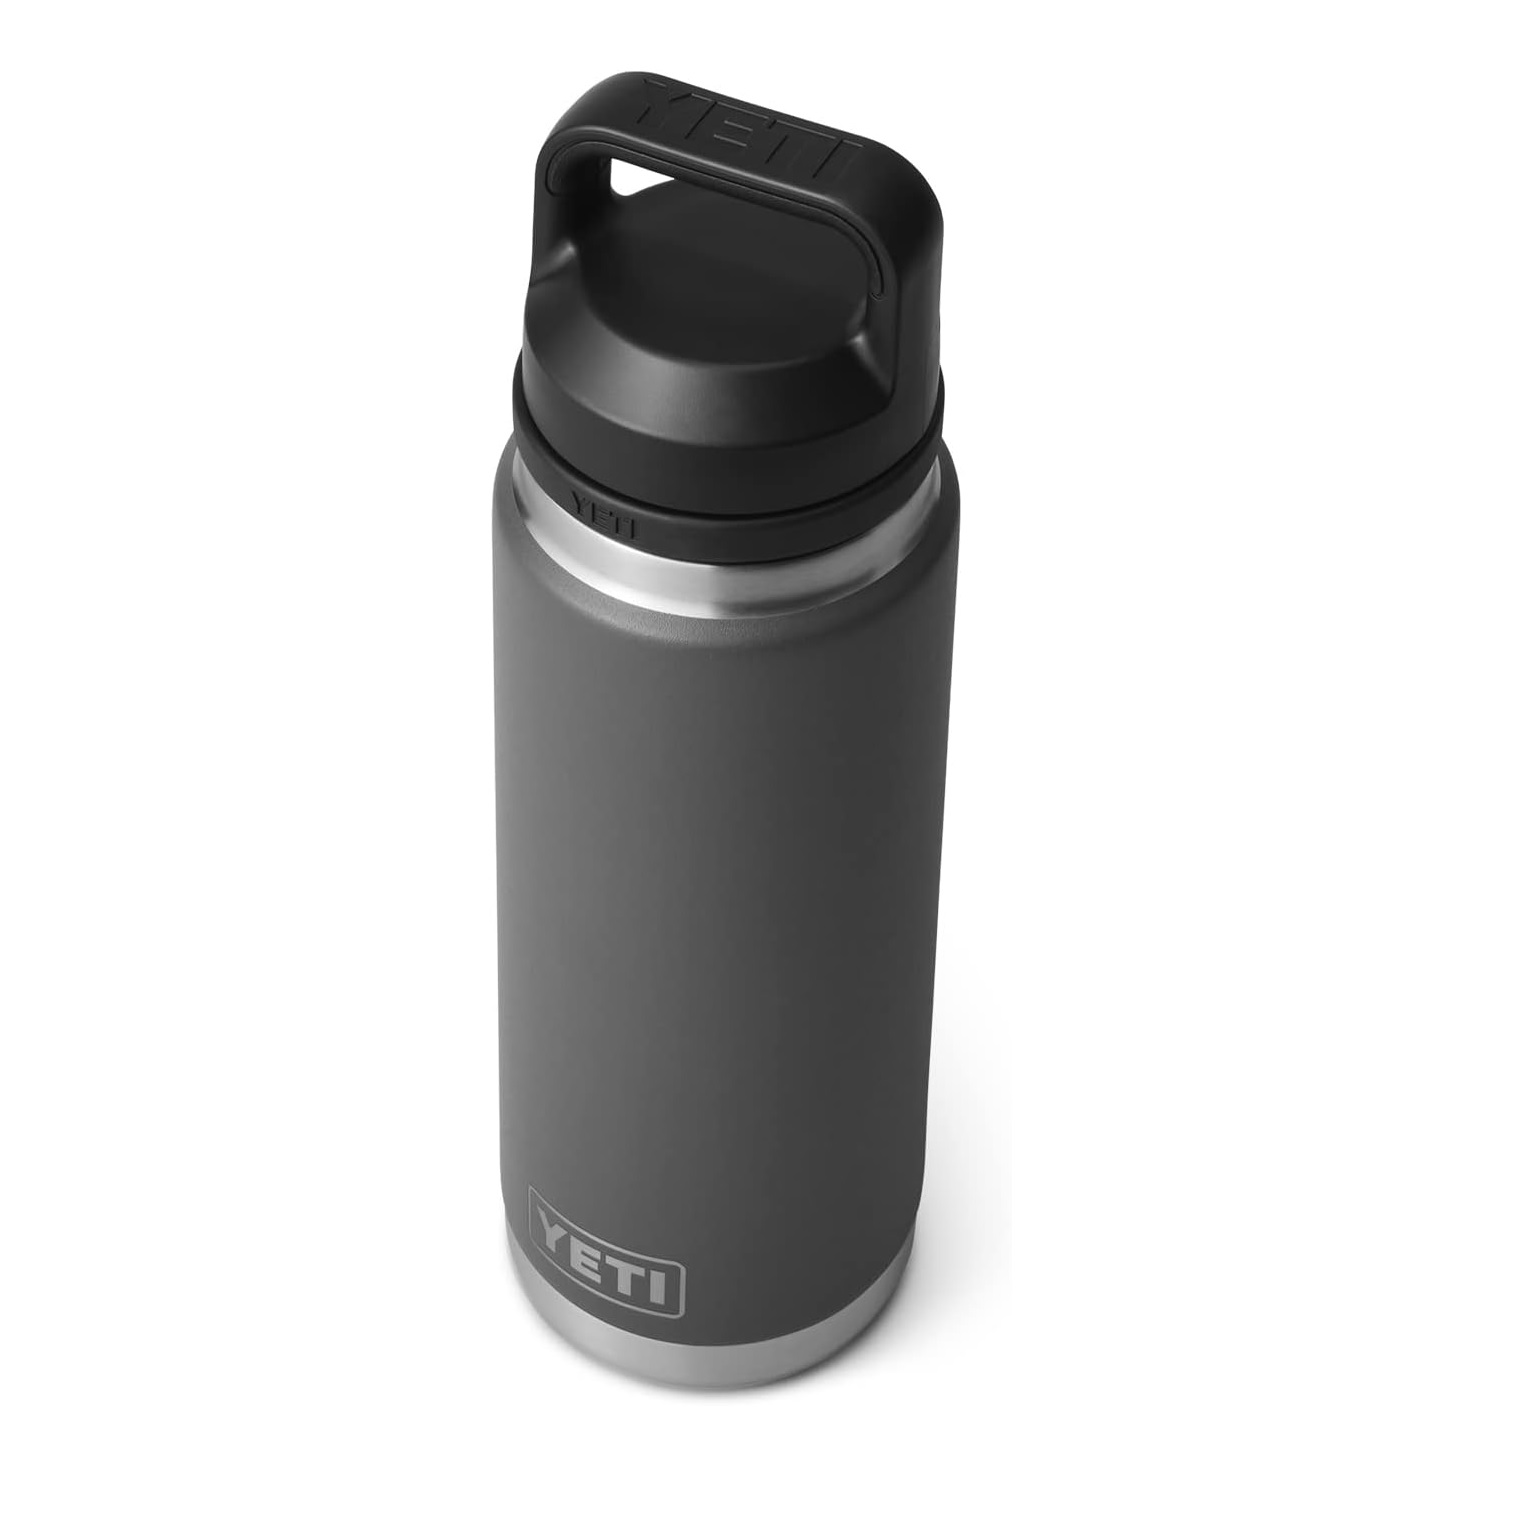 YETI tumbler makes a perfect cocktail shaker. Just mix the